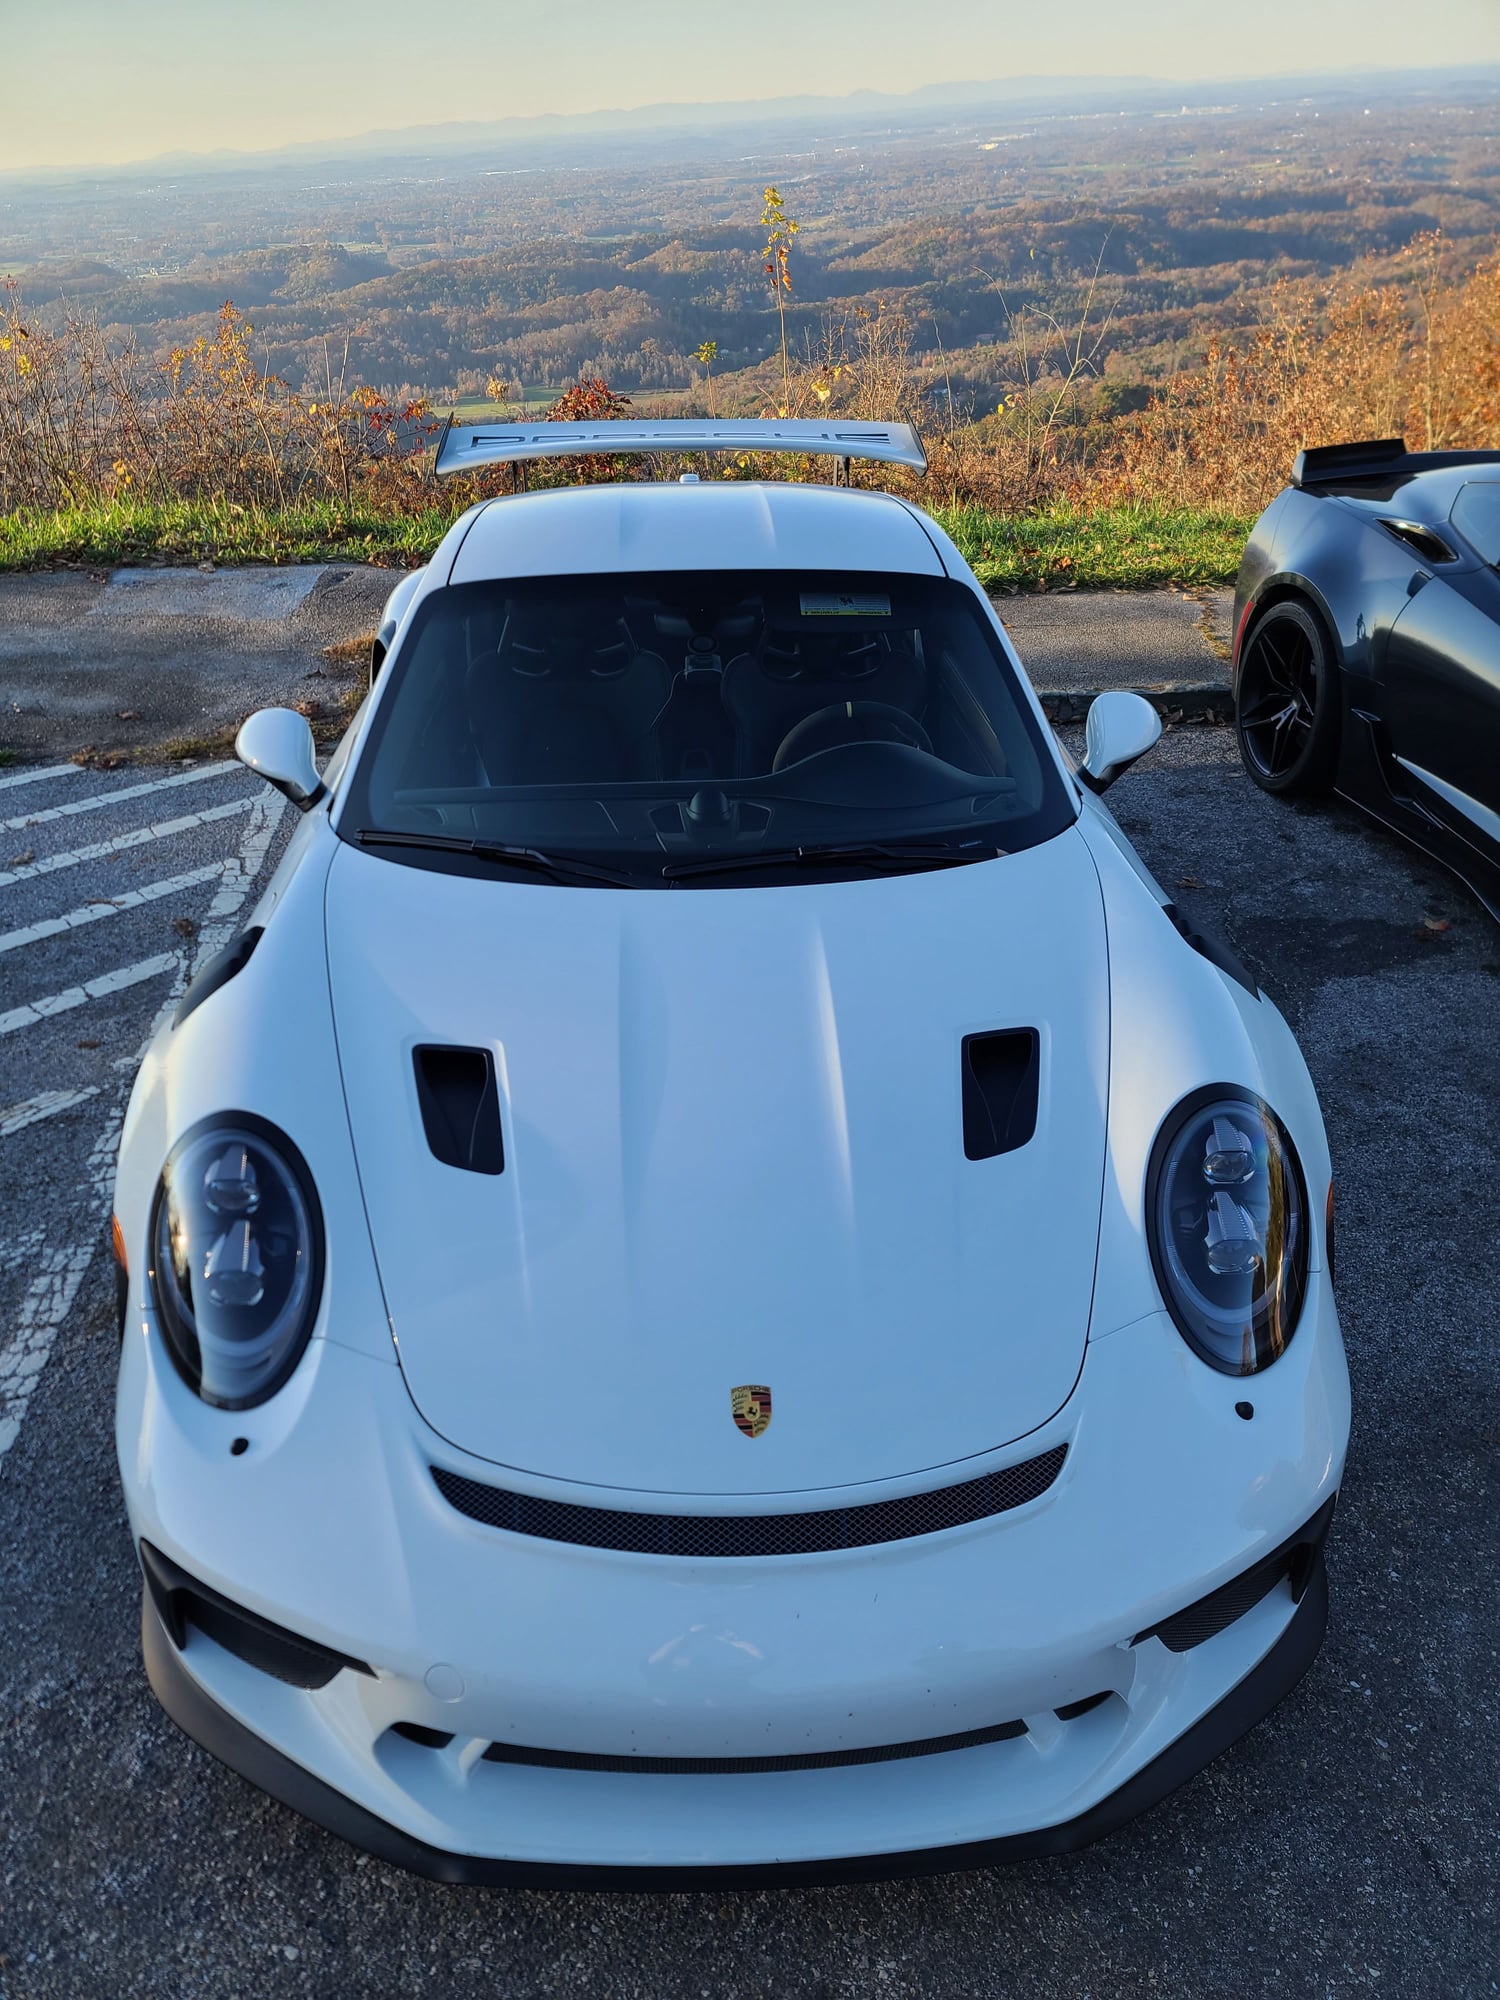 2019 Porsche GT3 - 2019 Porsche GT3RS with 15k aftermarket add ons... - Used - VIN WPOAF2A91KS164716 - 4,361 Miles - 6 cyl - 2WD - Automatic - Coupe - White - Knoxville, TN 37849, United States